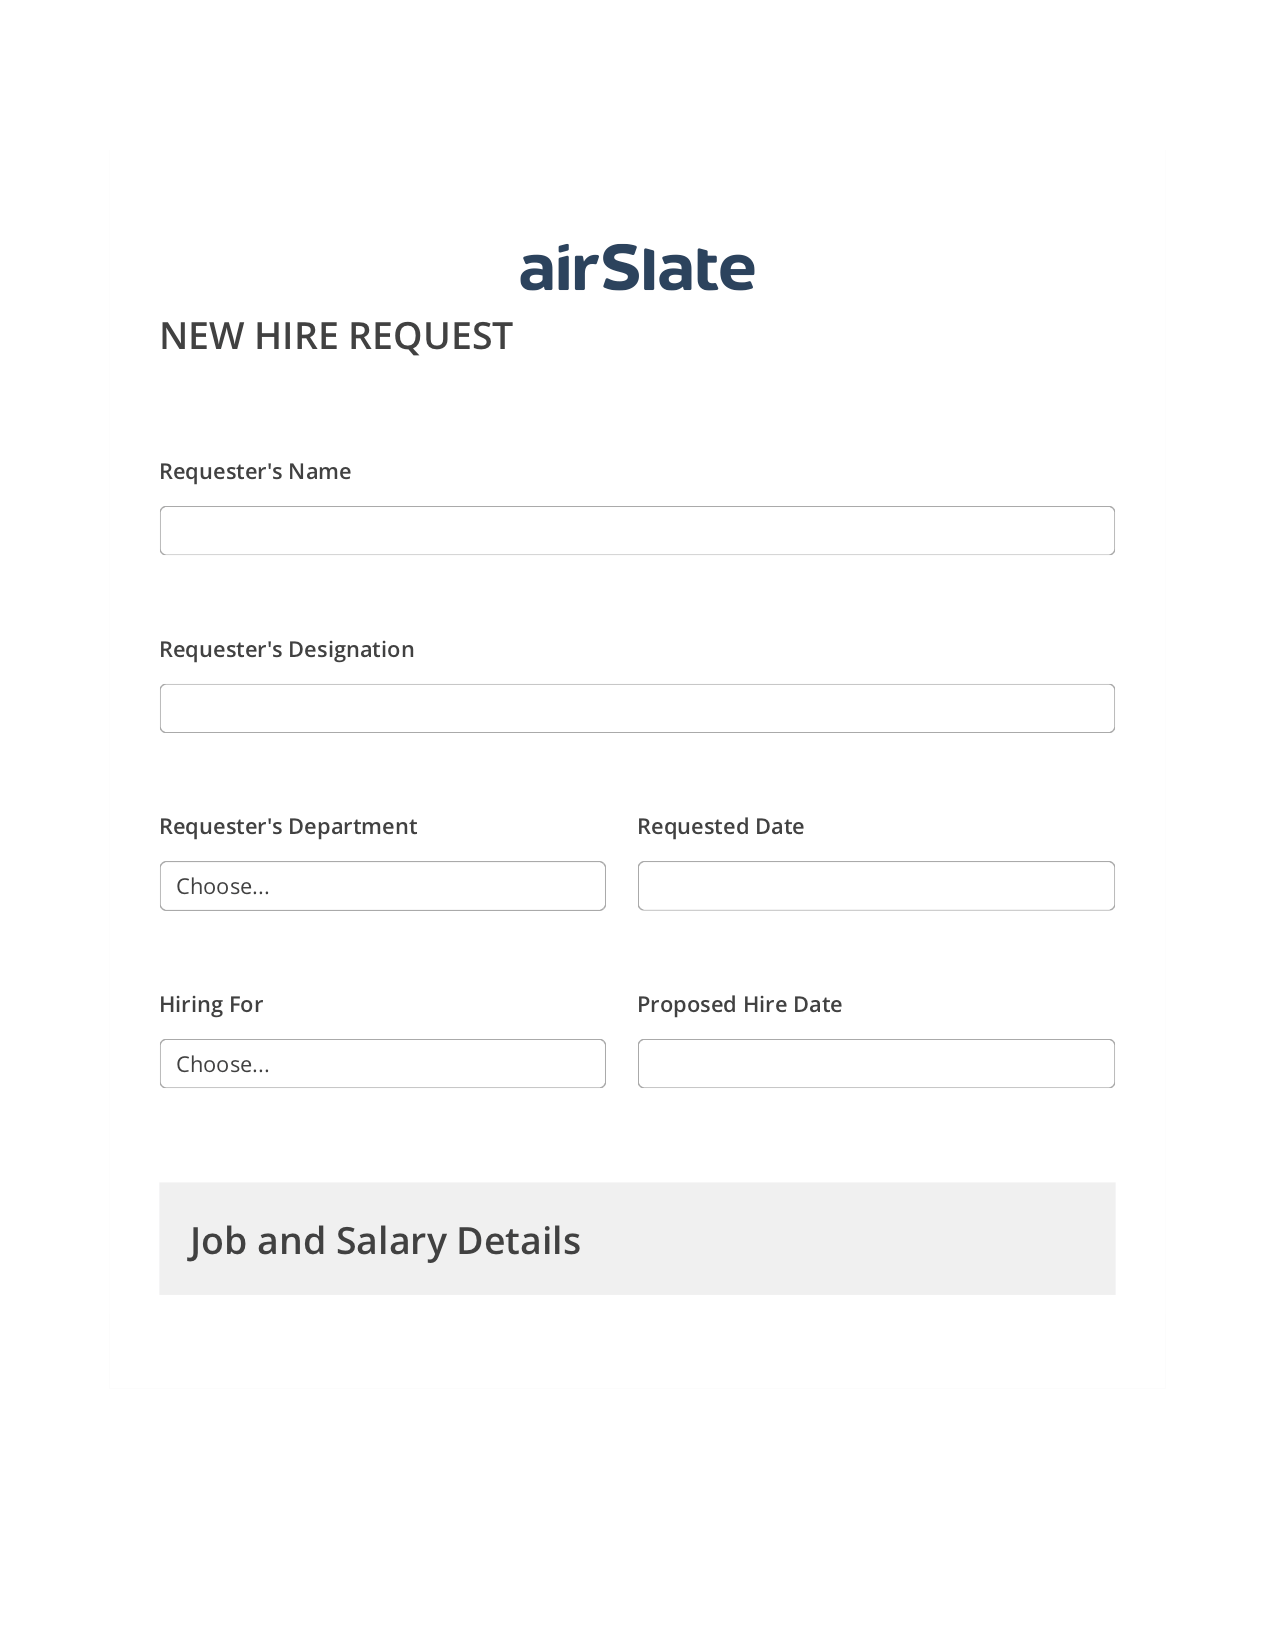 Hiring Request Workflow Pre-fill Dropdowns from Excel Bot, Create Slate Reminder Bot, Archive to Box Bot